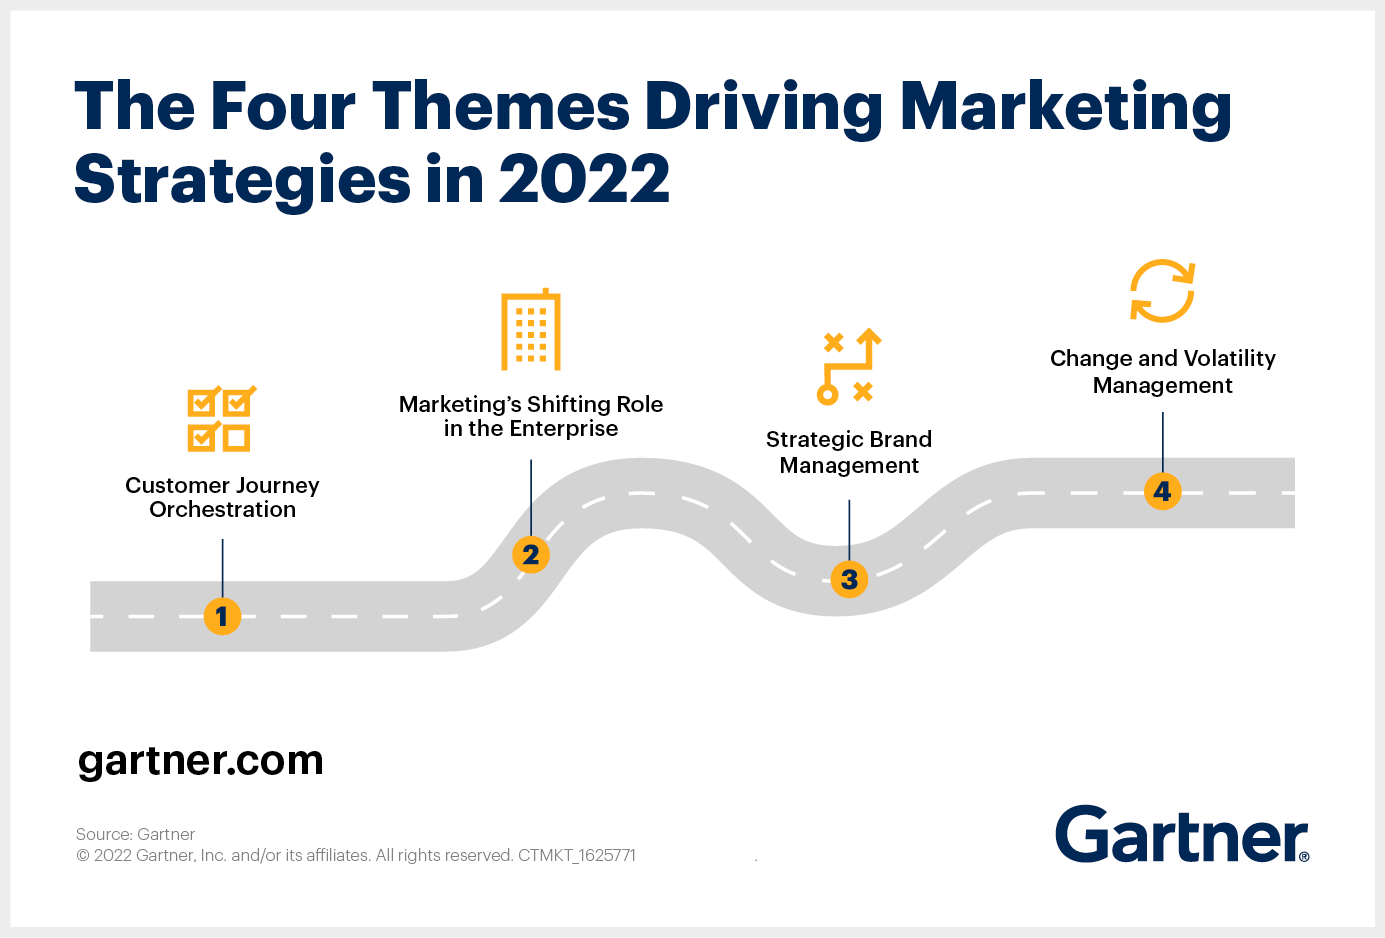 The Four Themes Driving Marketing Strategies in 2022